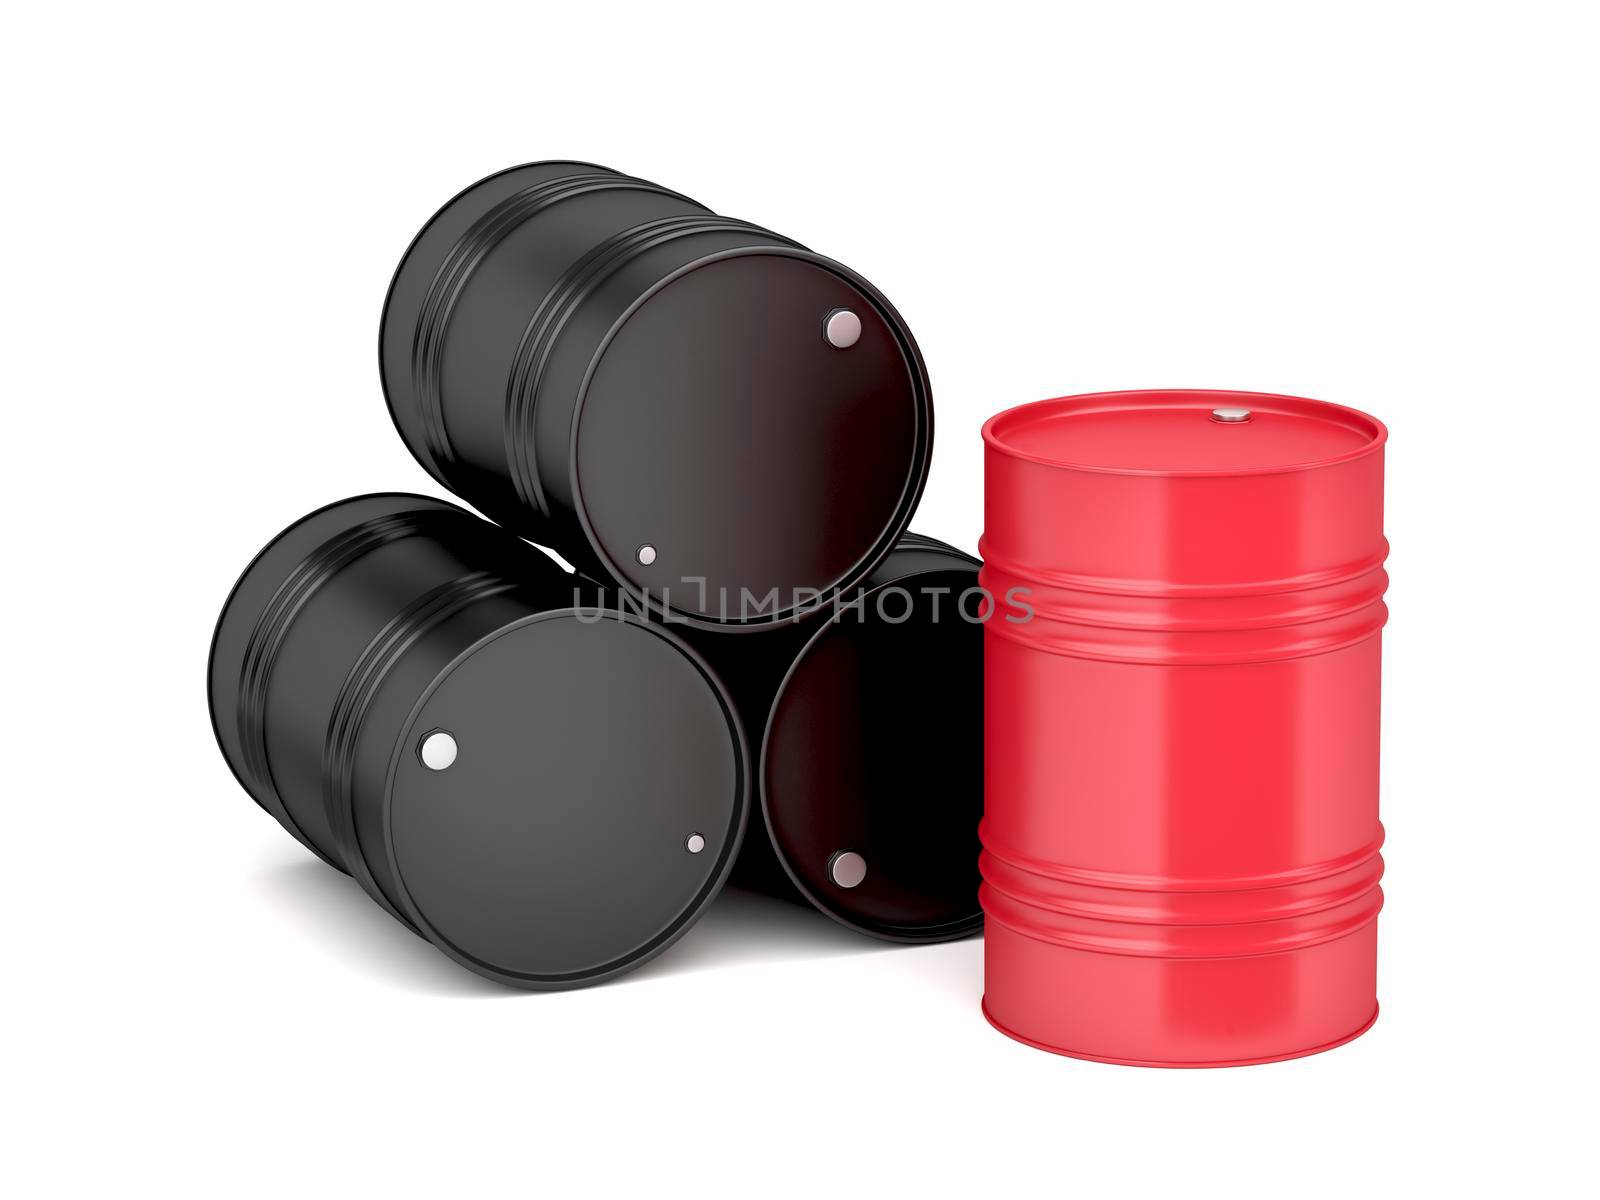 Oil drums on white background